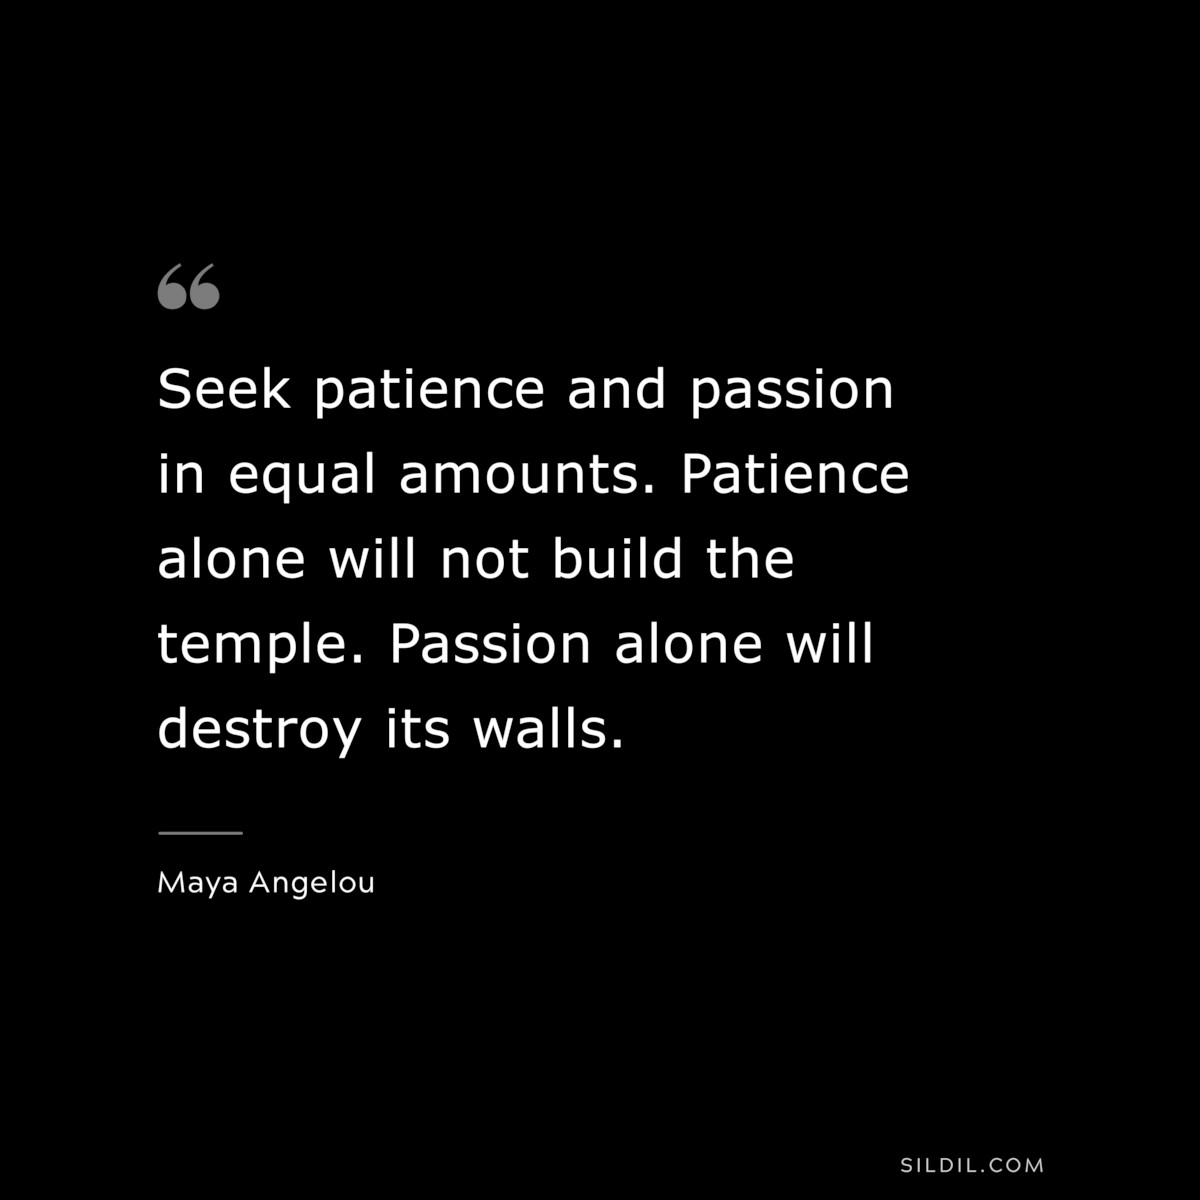 Seek patience and passion in equal amounts. Patience alone will not build the temple. Passion alone will destroy its walls. ― Maya Angelou